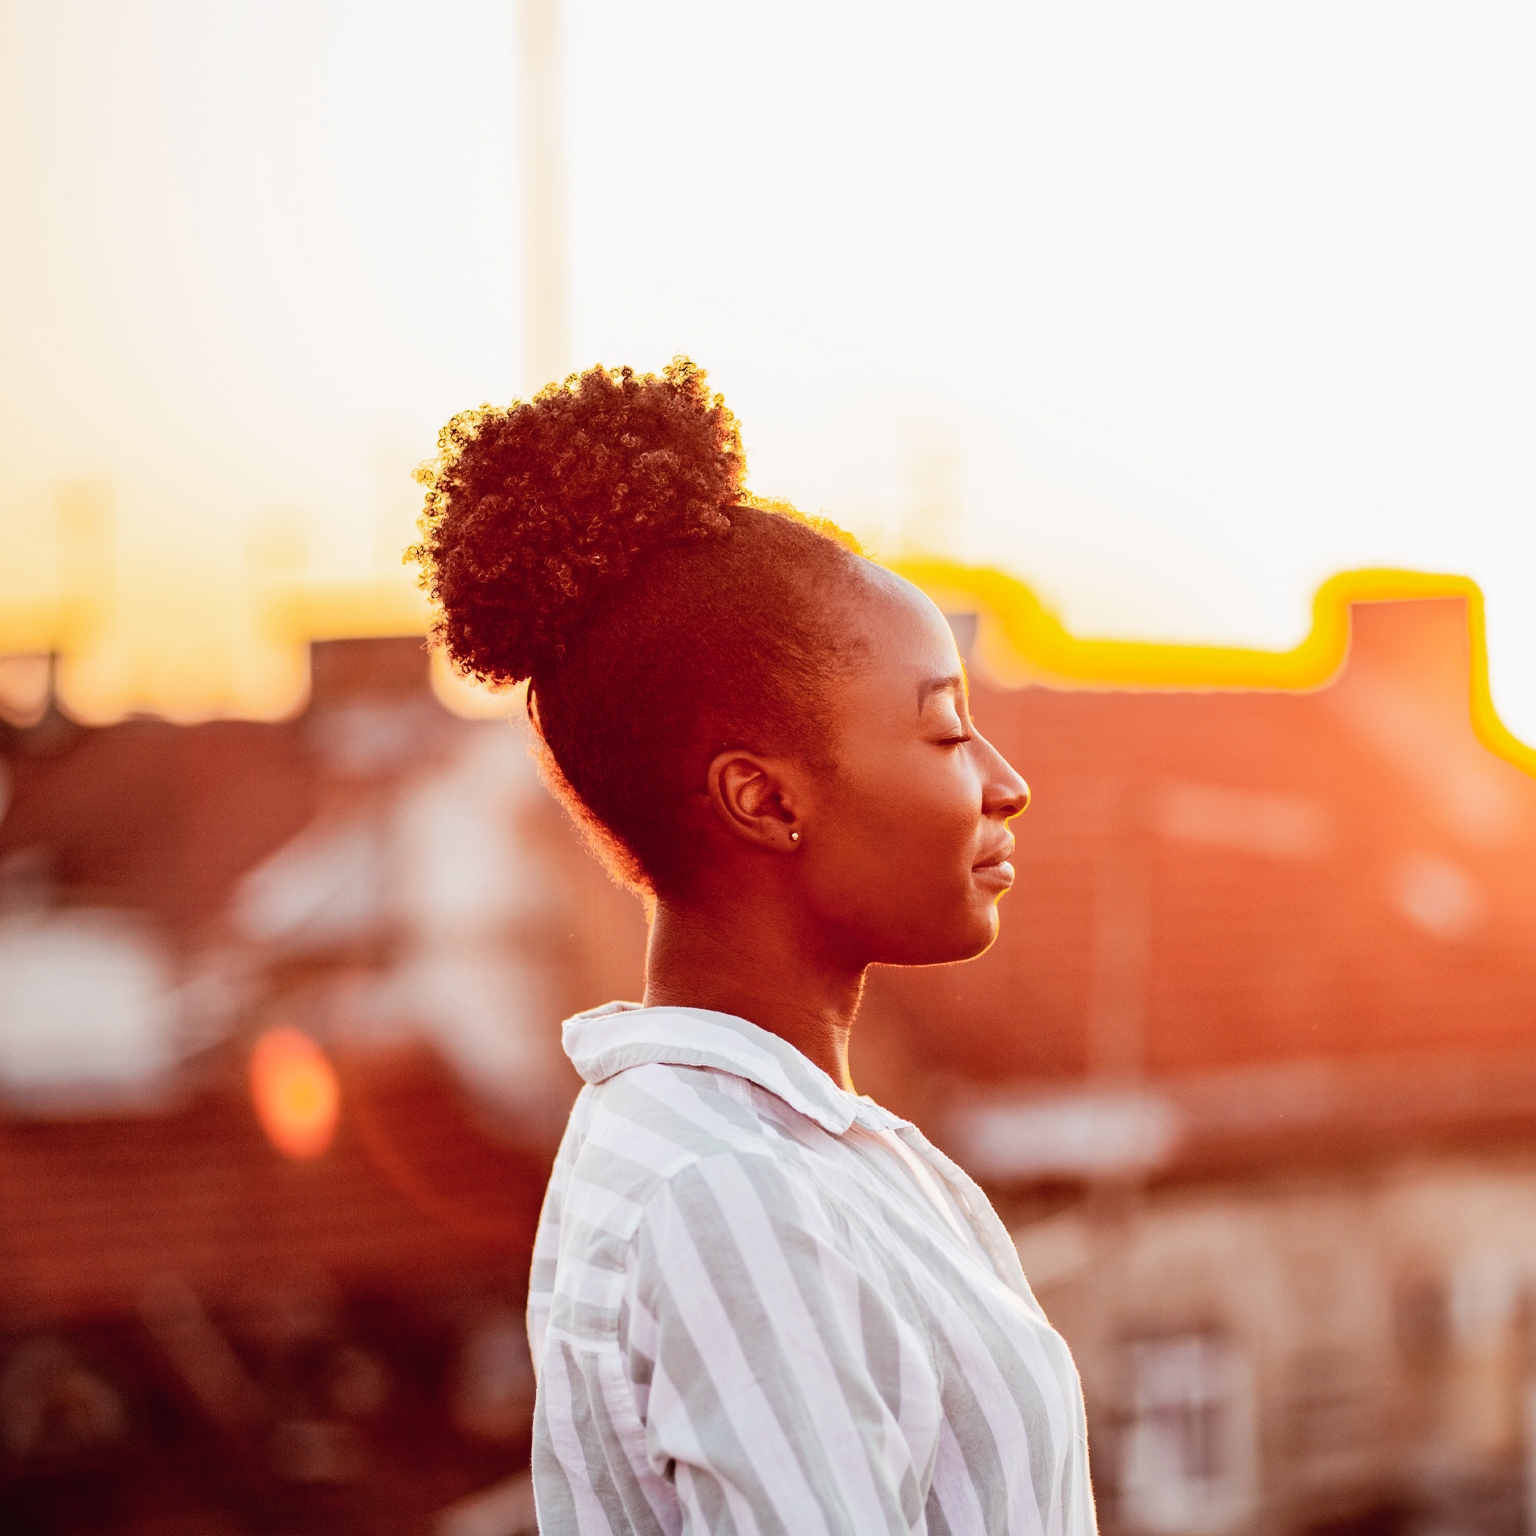 Young African American woman is relaxing on the rooftop with sunset light on her face